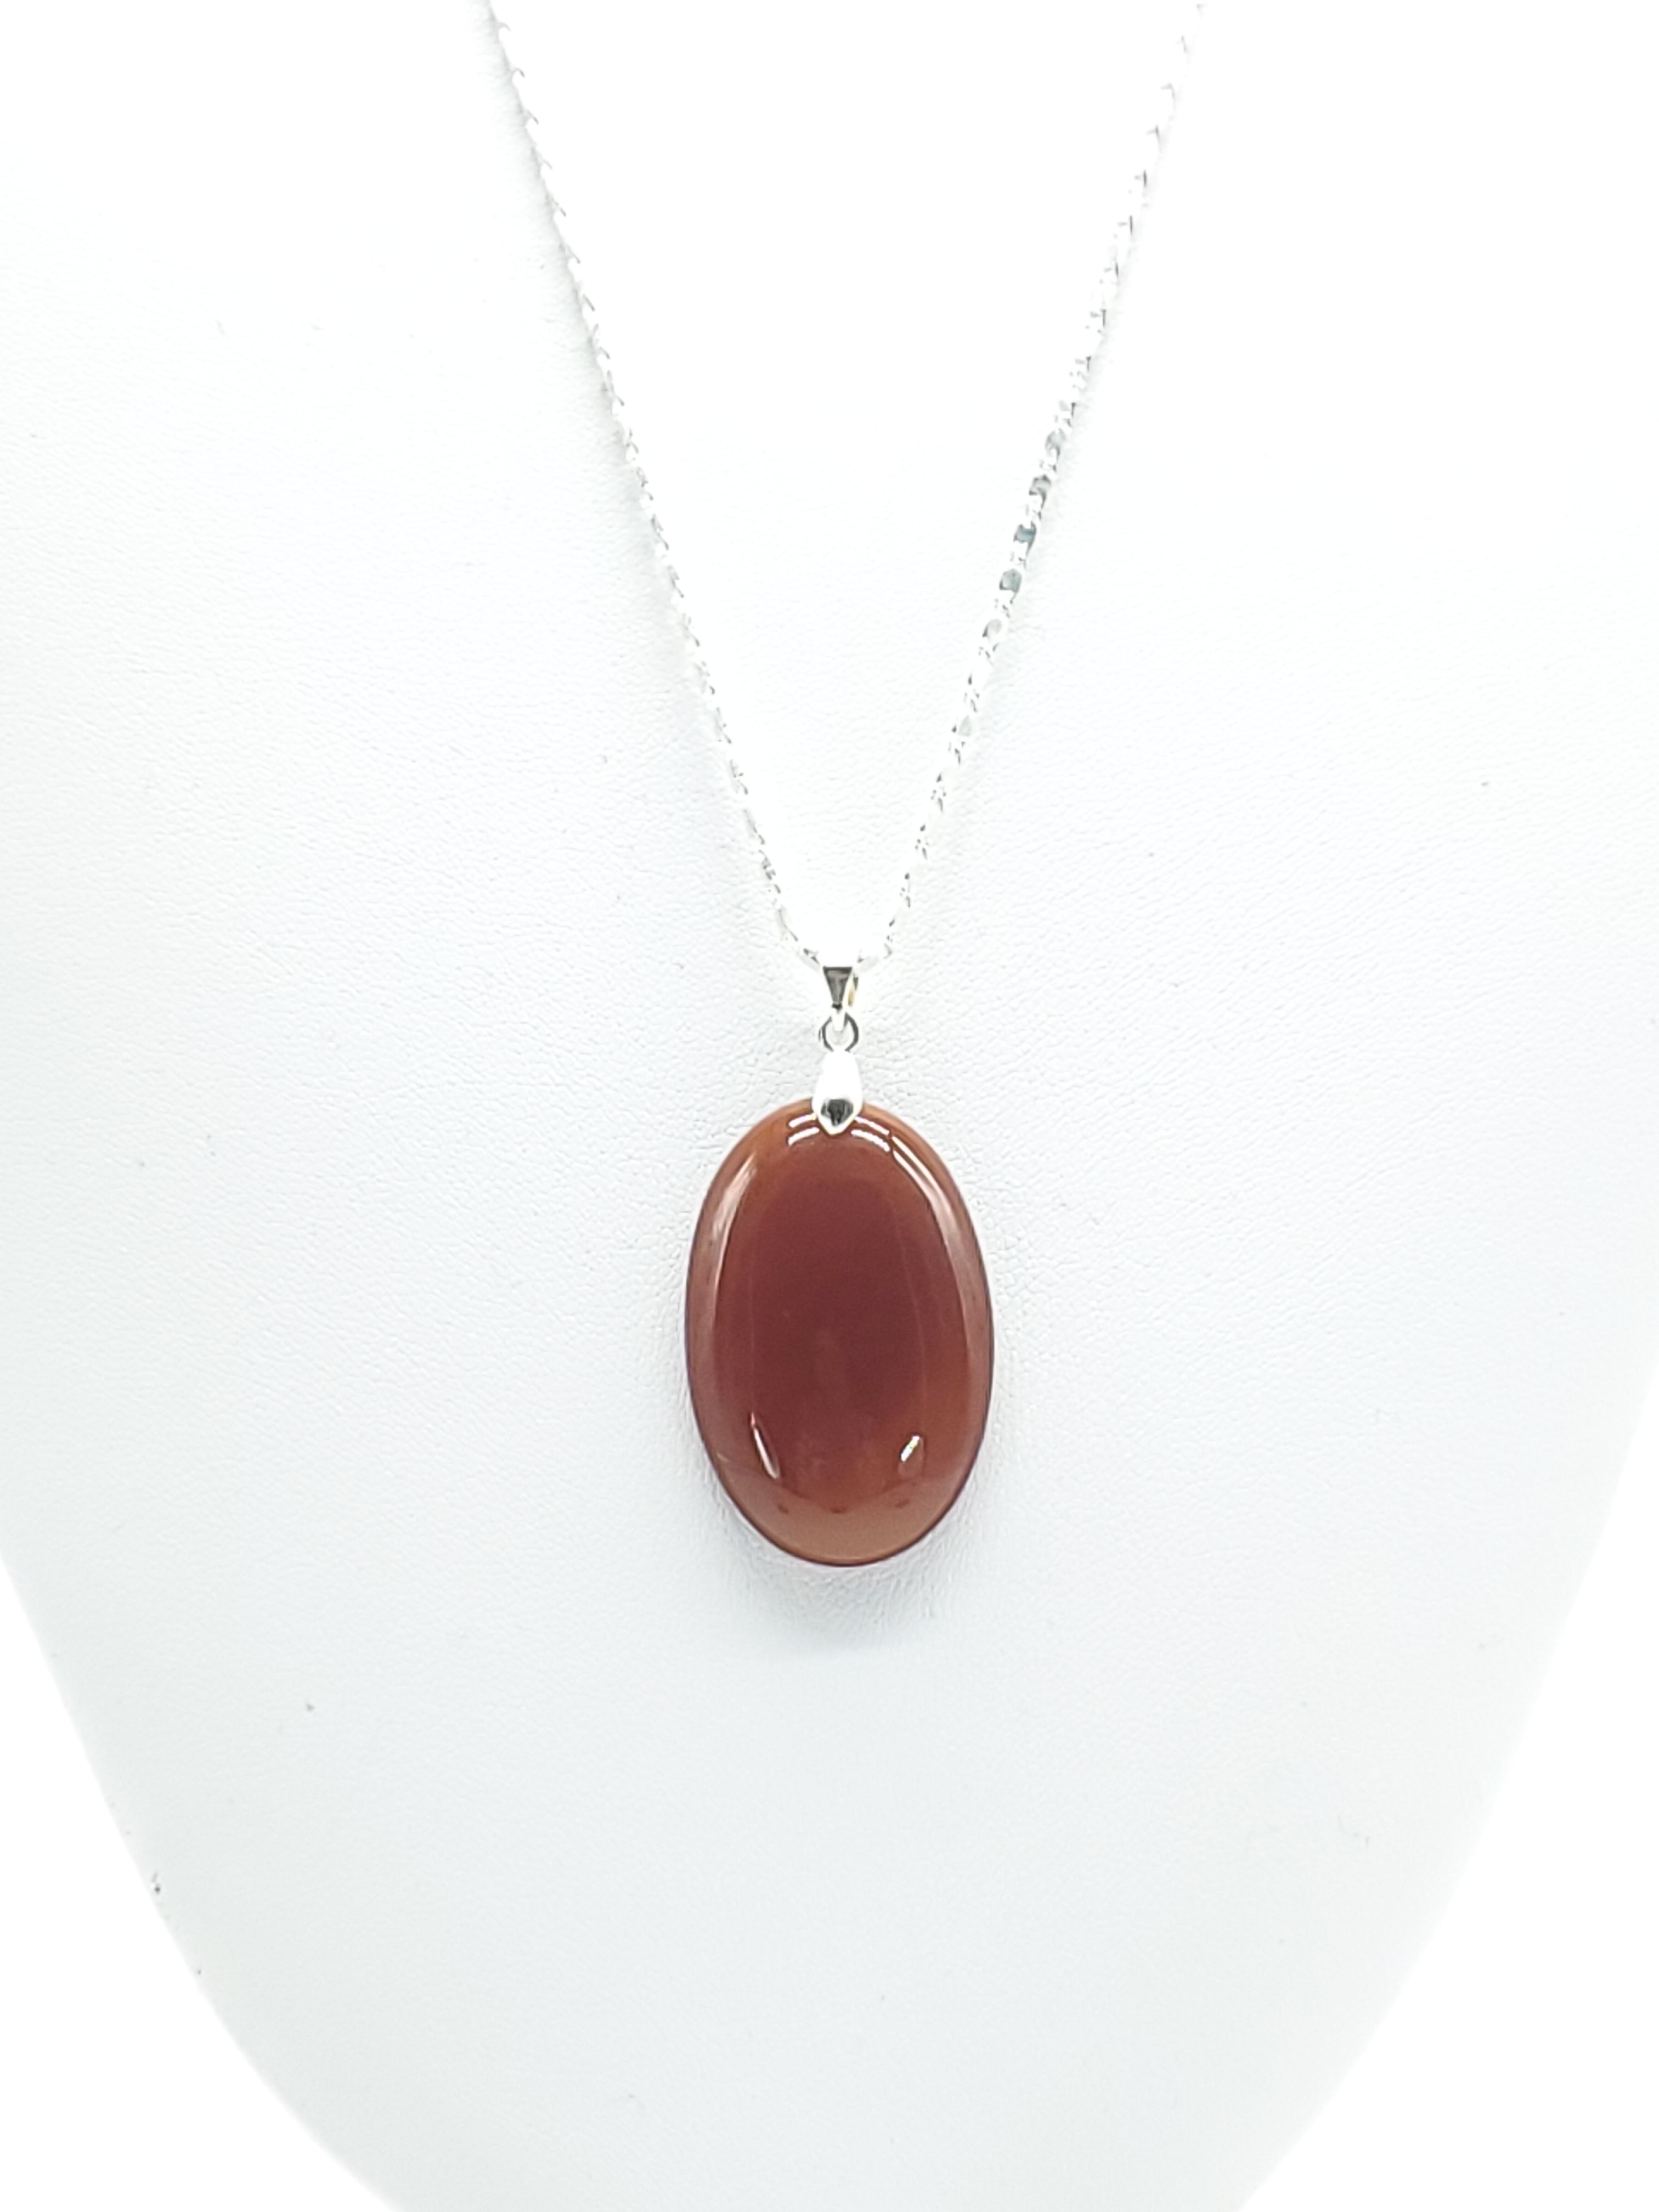 Oval Red Carnelian Necklace on Sterling Silver Flat S Chain - The Caffeinated Raven